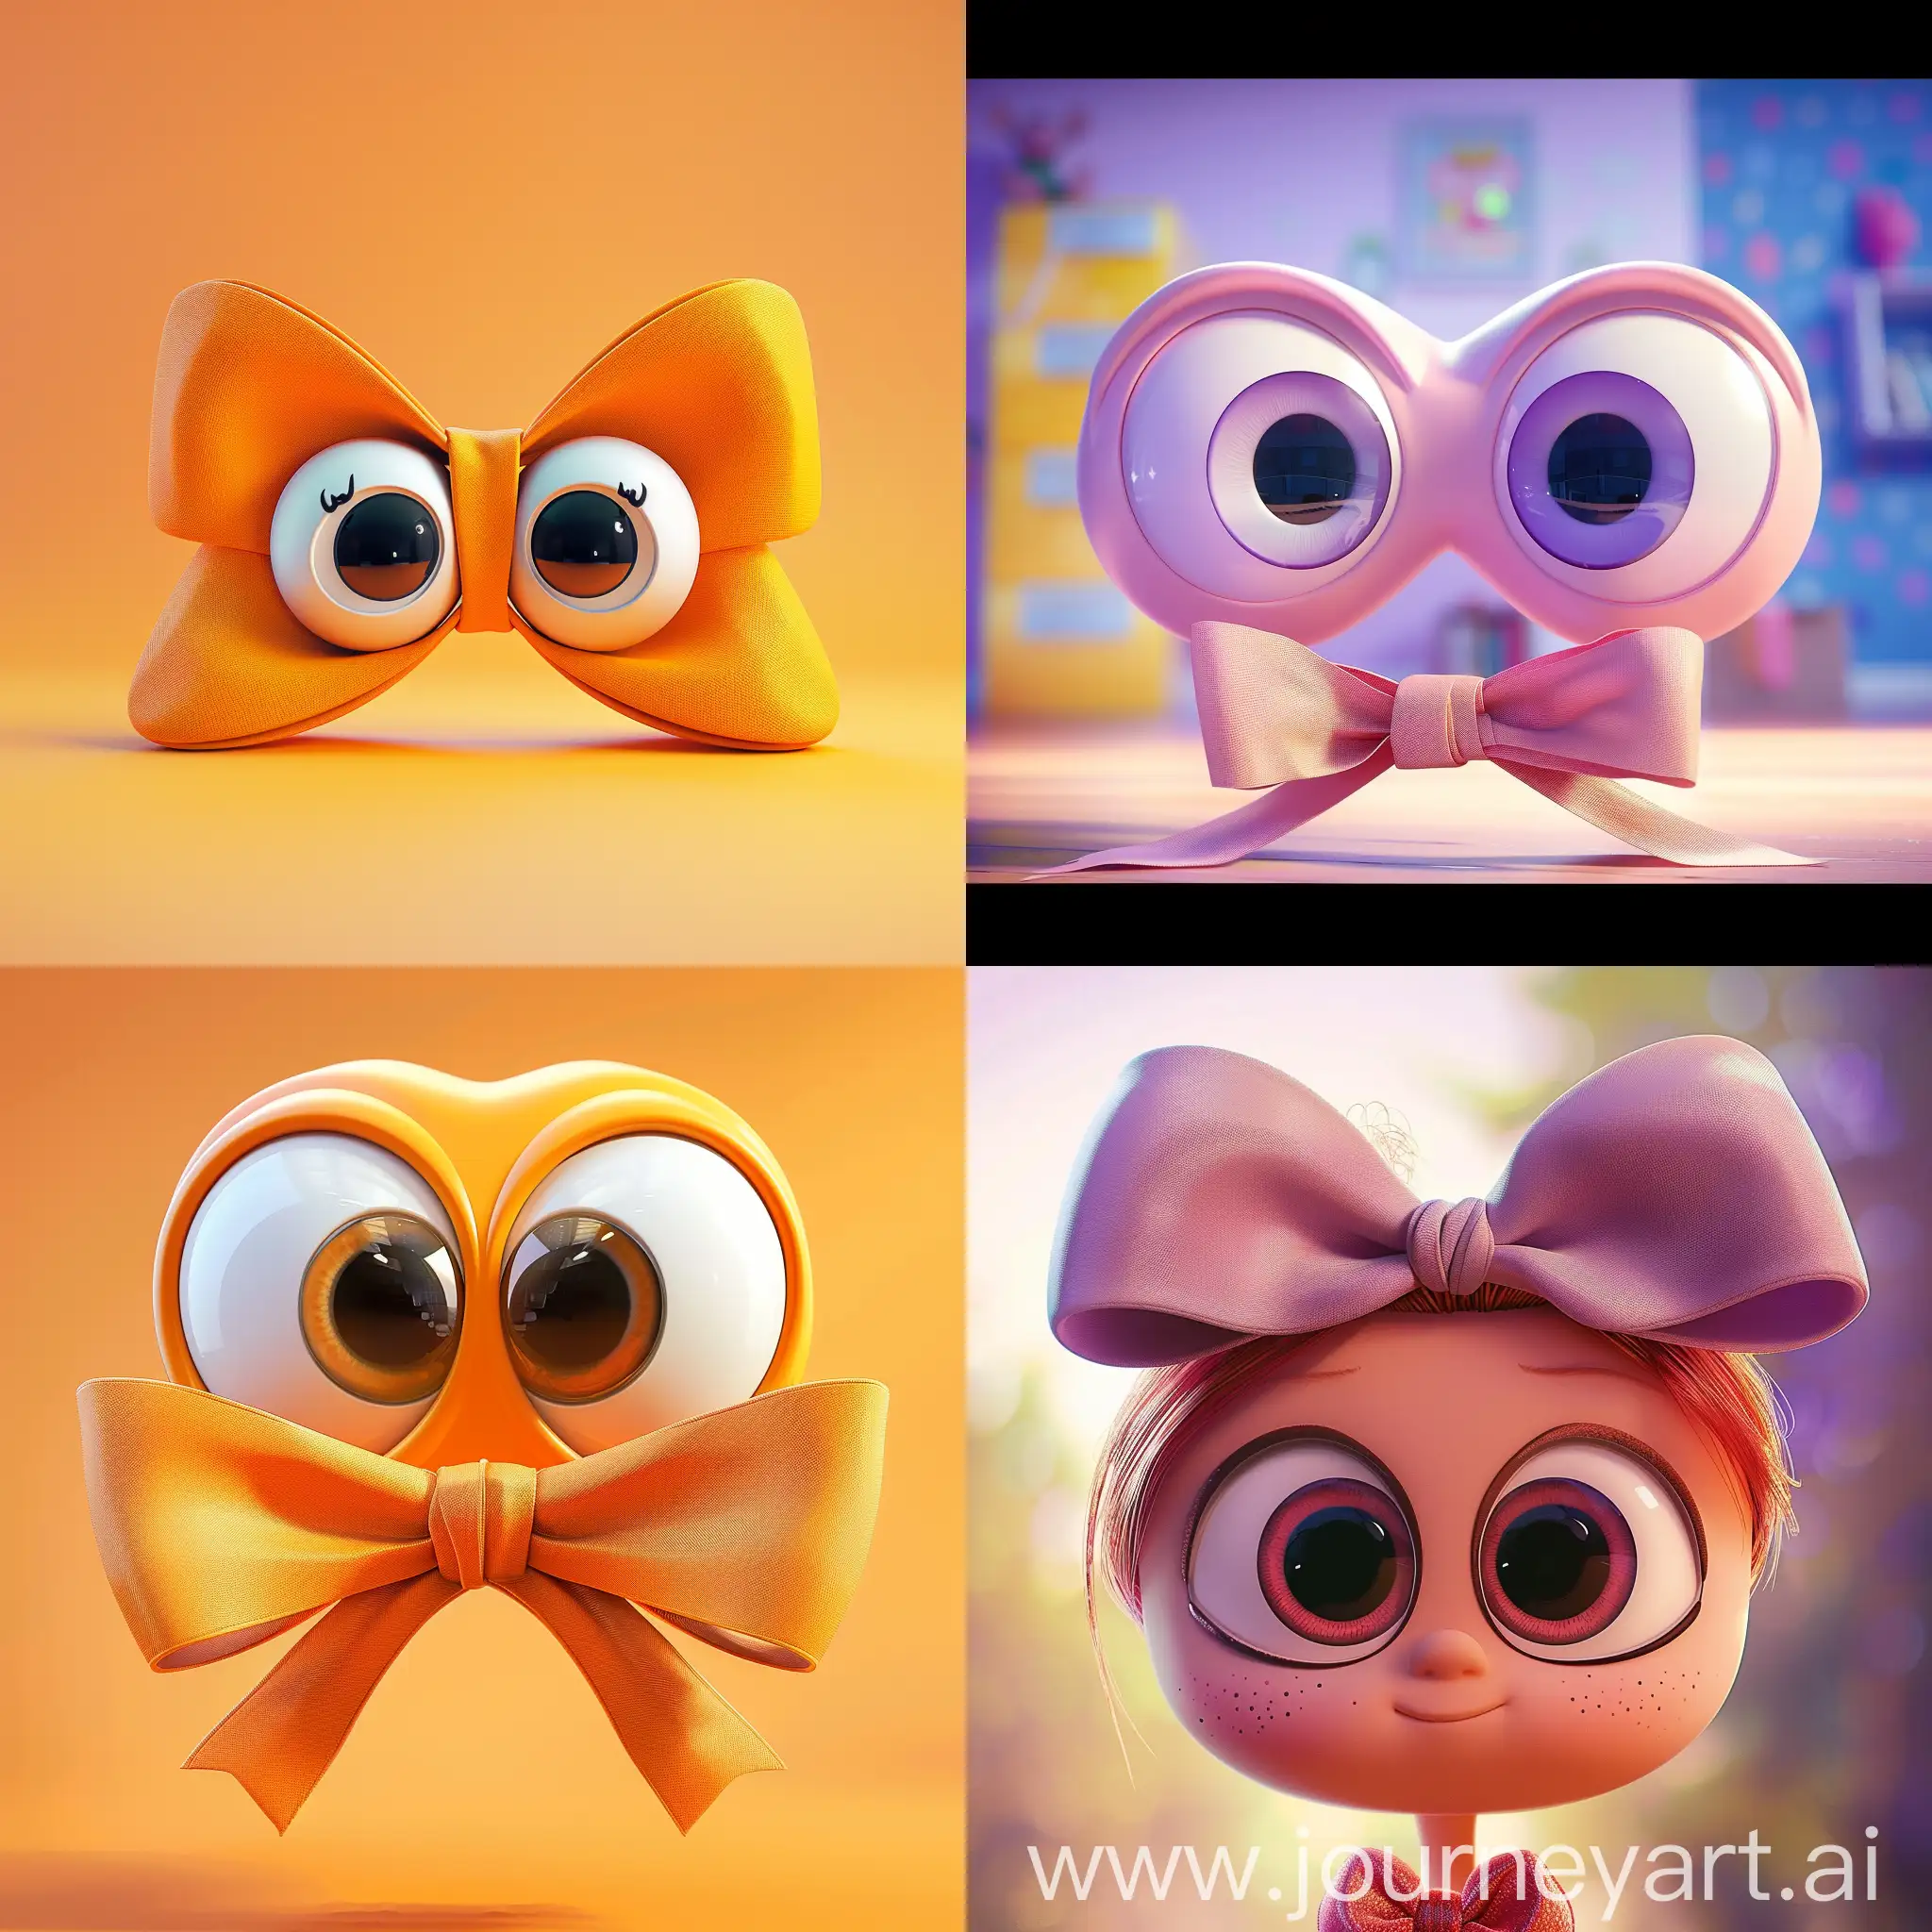 Emotional-Side-View-of-a-BigEyed-Bow-Symmetrical-Pixar-Animation-on-Bright-Background